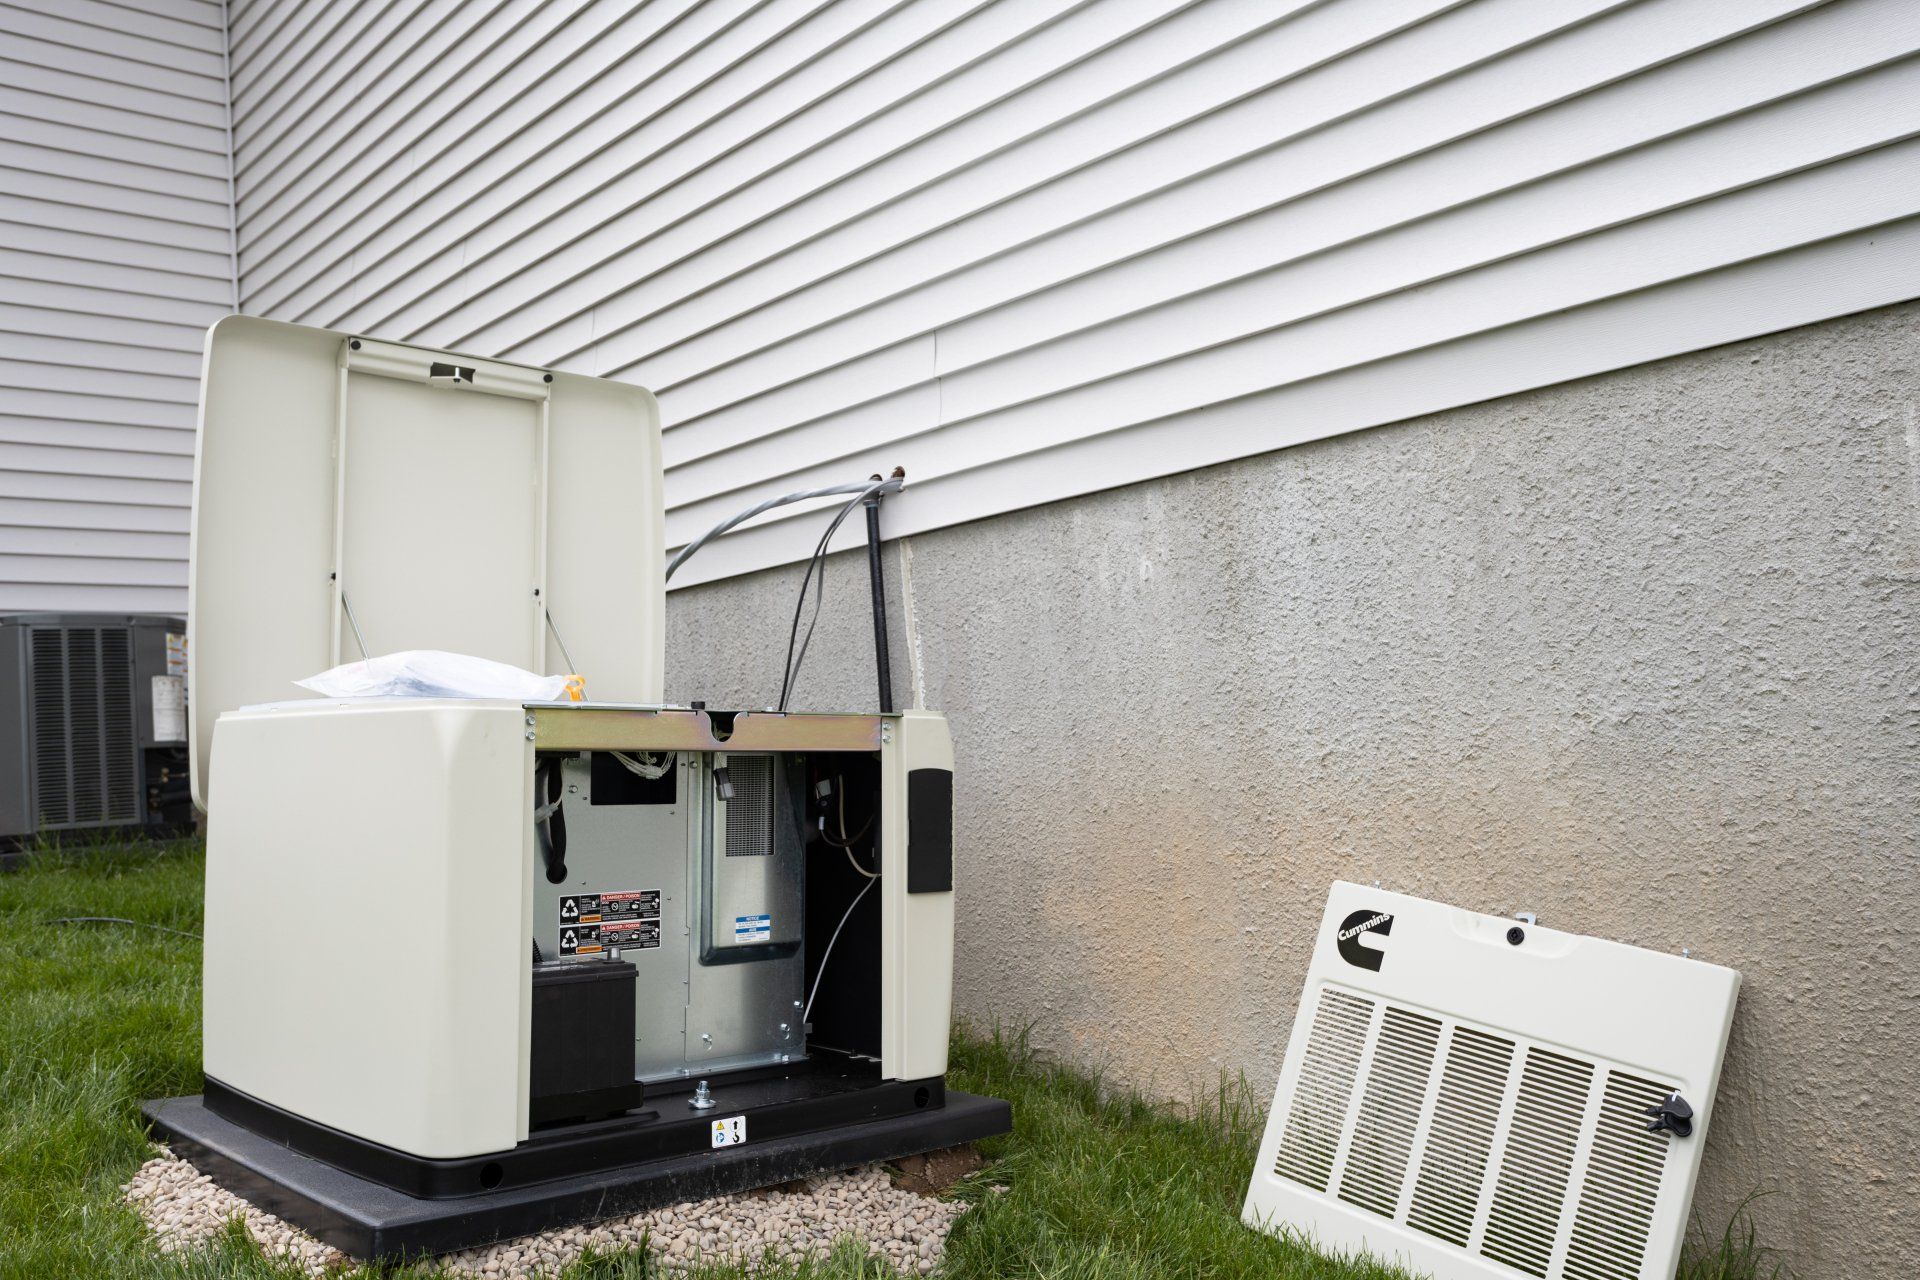 Open home standby generator image.